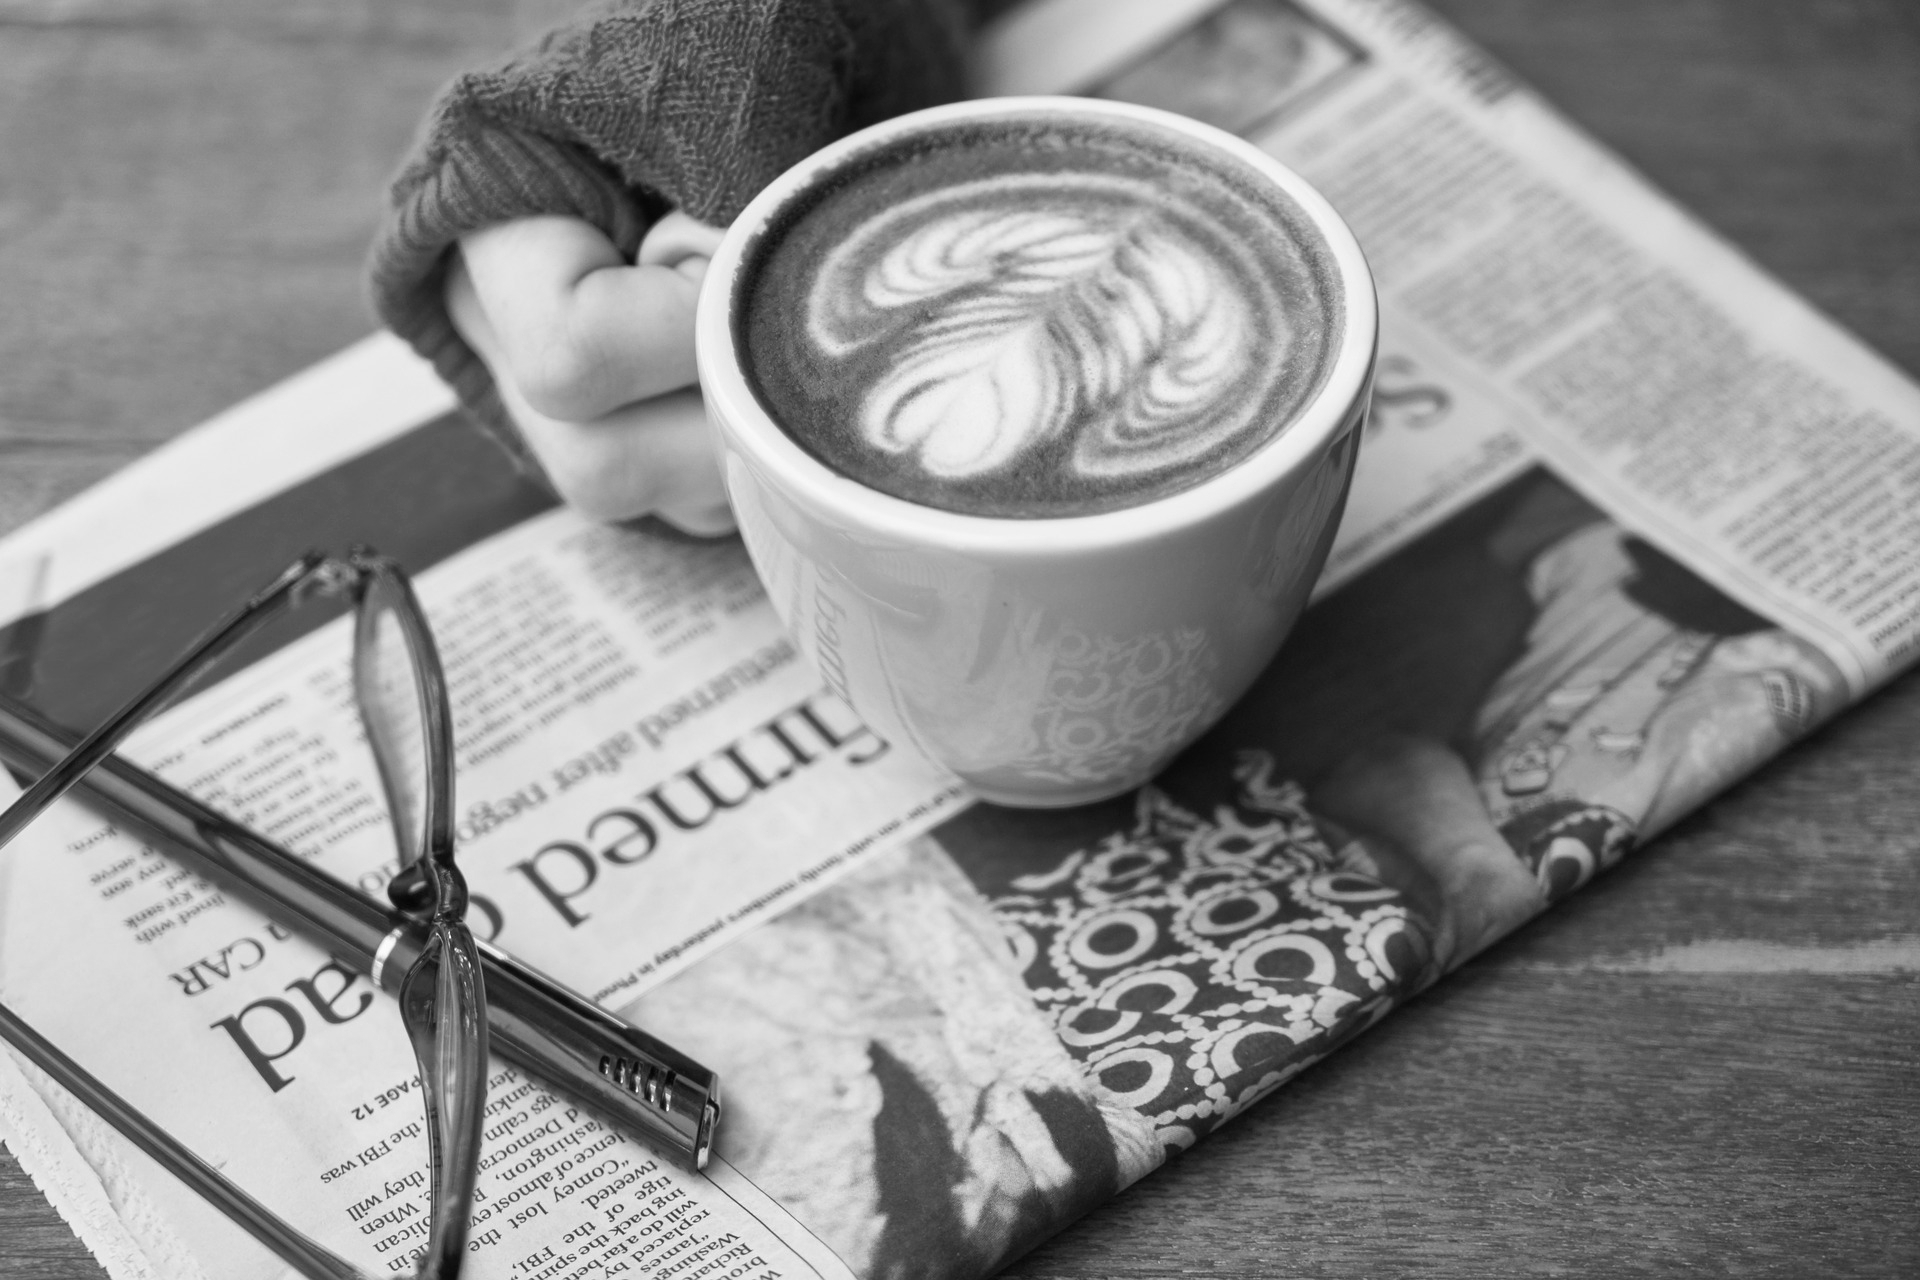 A hand holds a latte atop a newspaper on a table